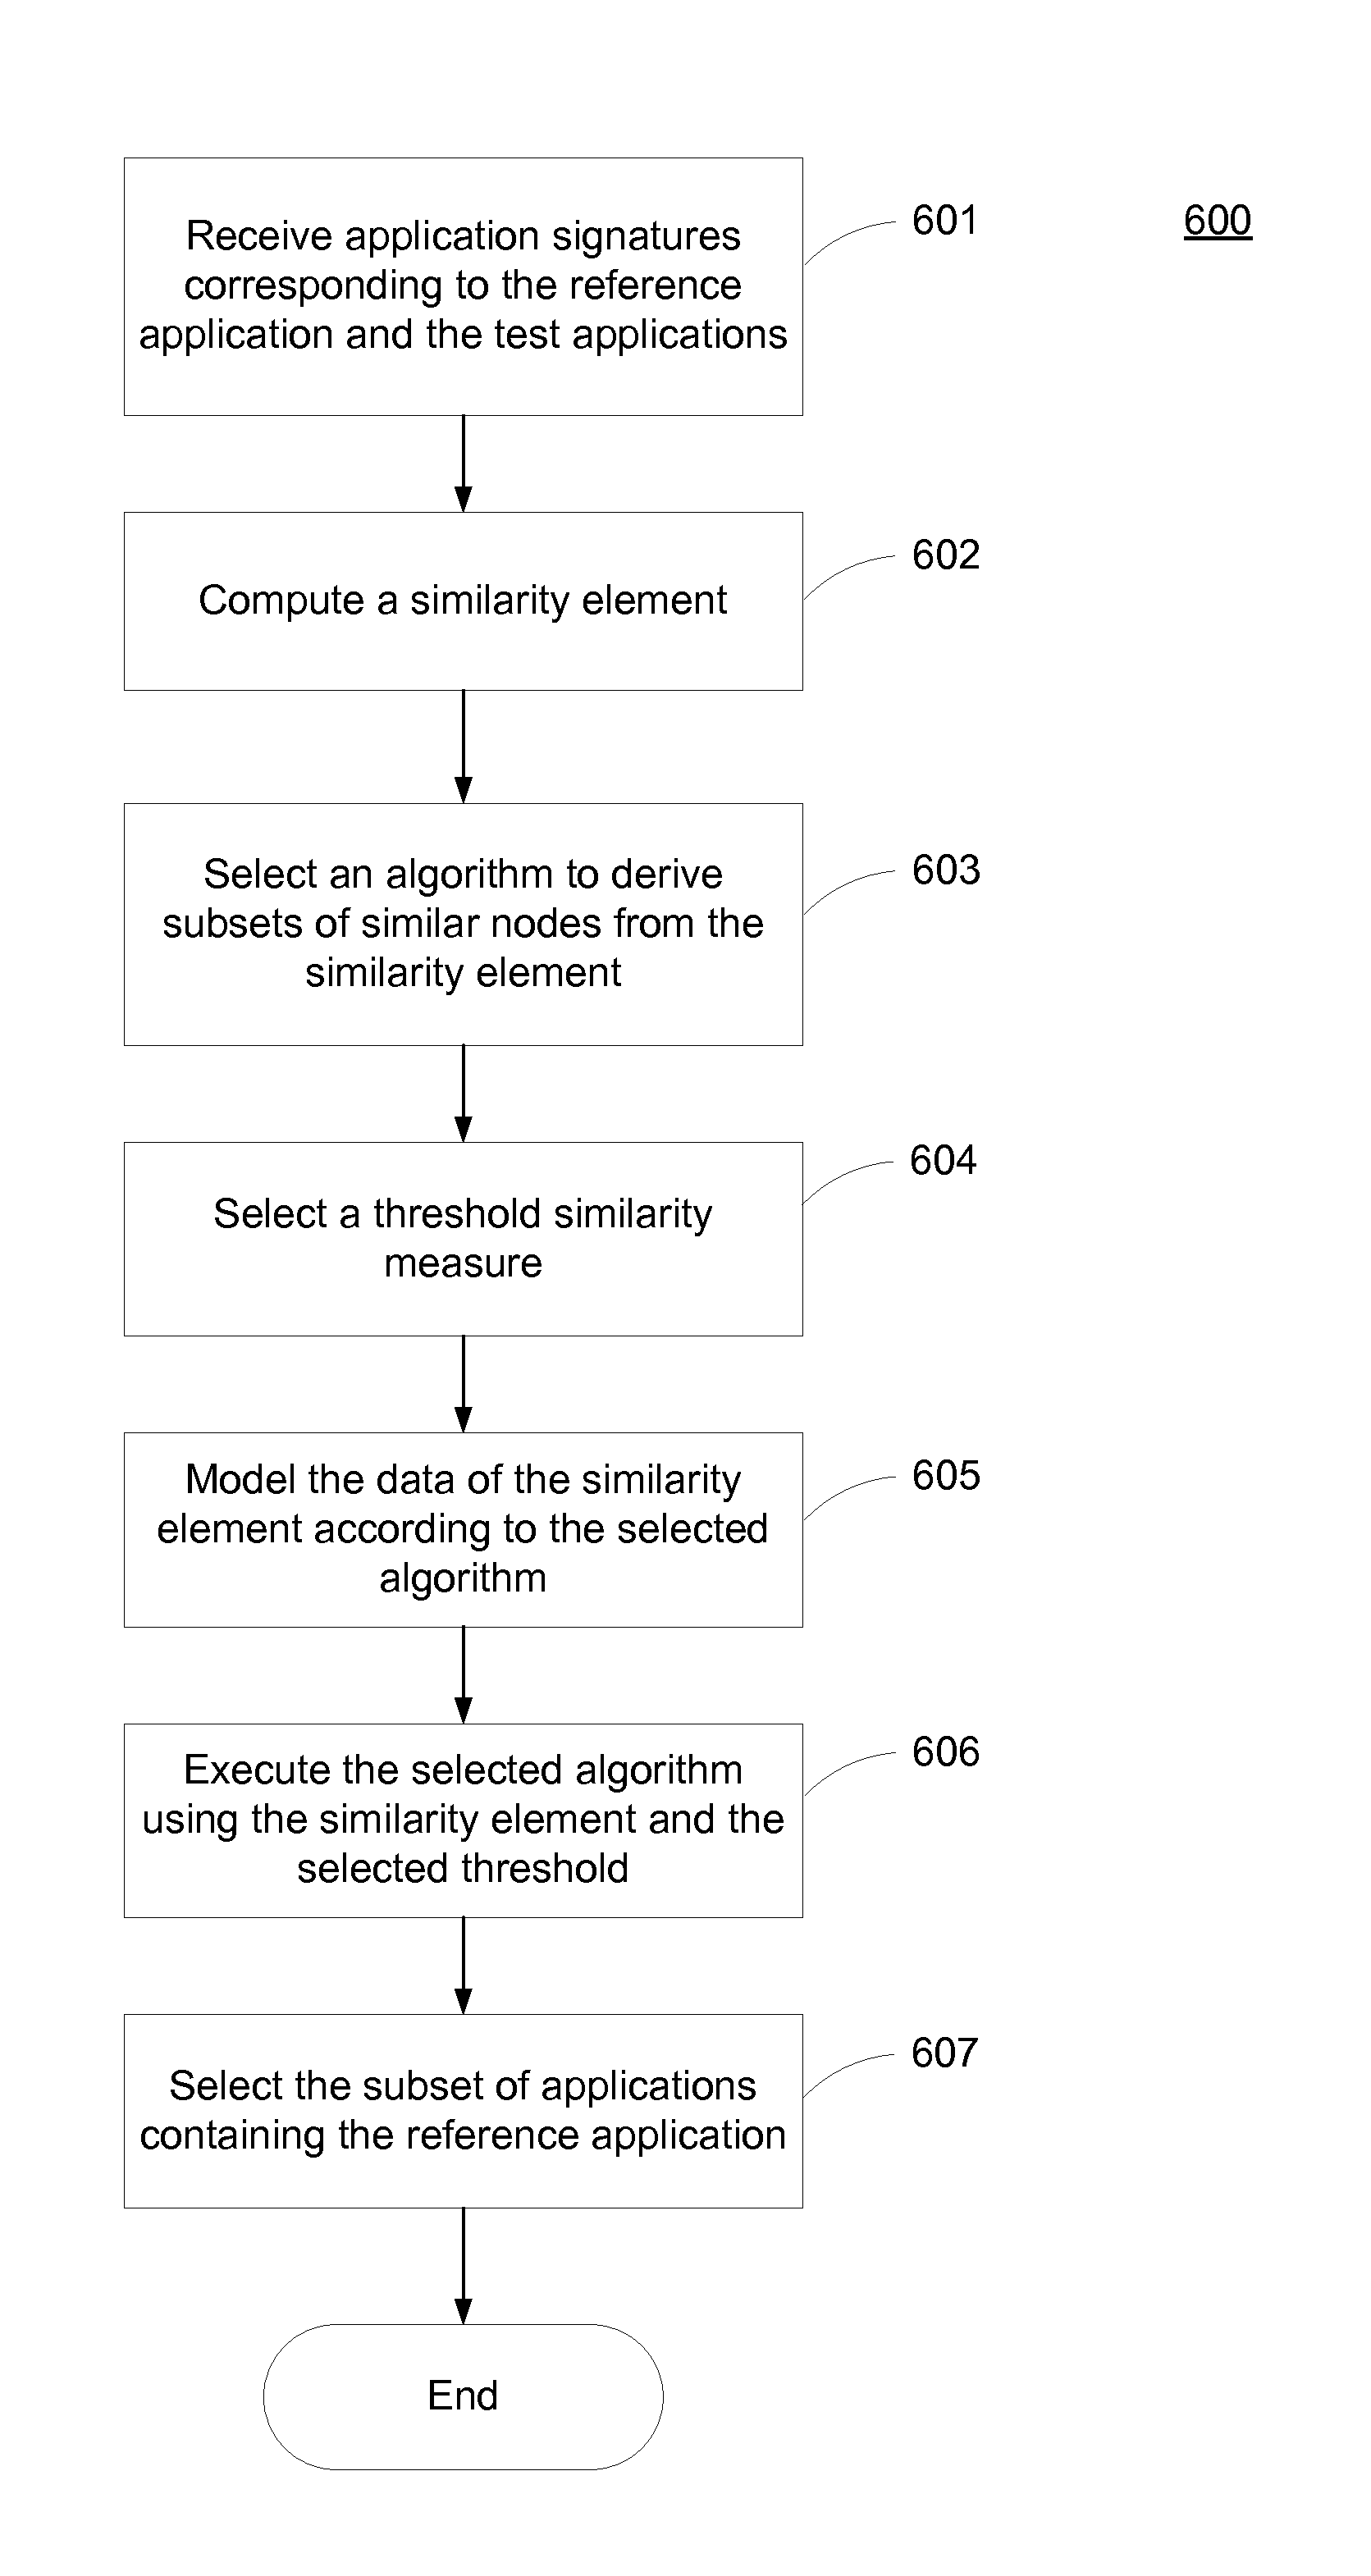 Method and System for Predicting Performance of Software Applications on Prospective Hardware Architecture